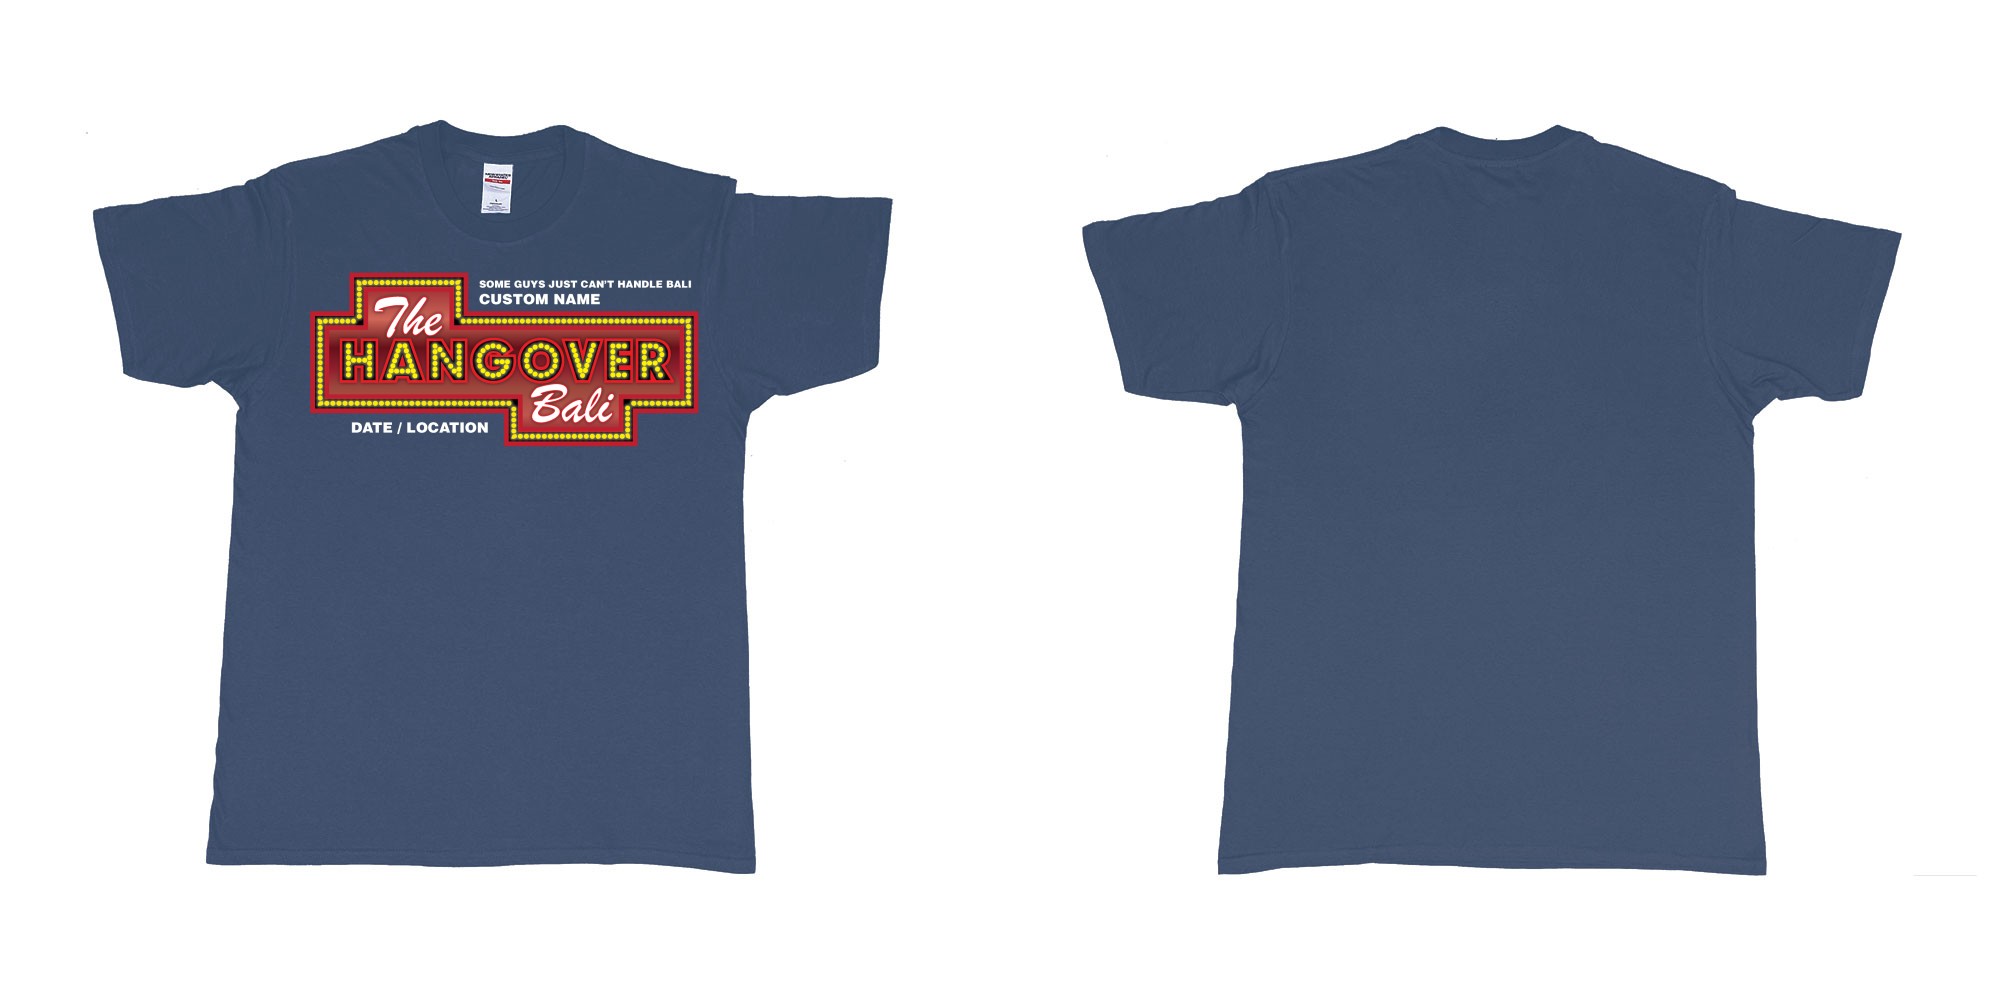 Custom tshirt design the hangover bali tour custom printing own name in fabric color navy choice your own text made in Bali by The Pirate Way